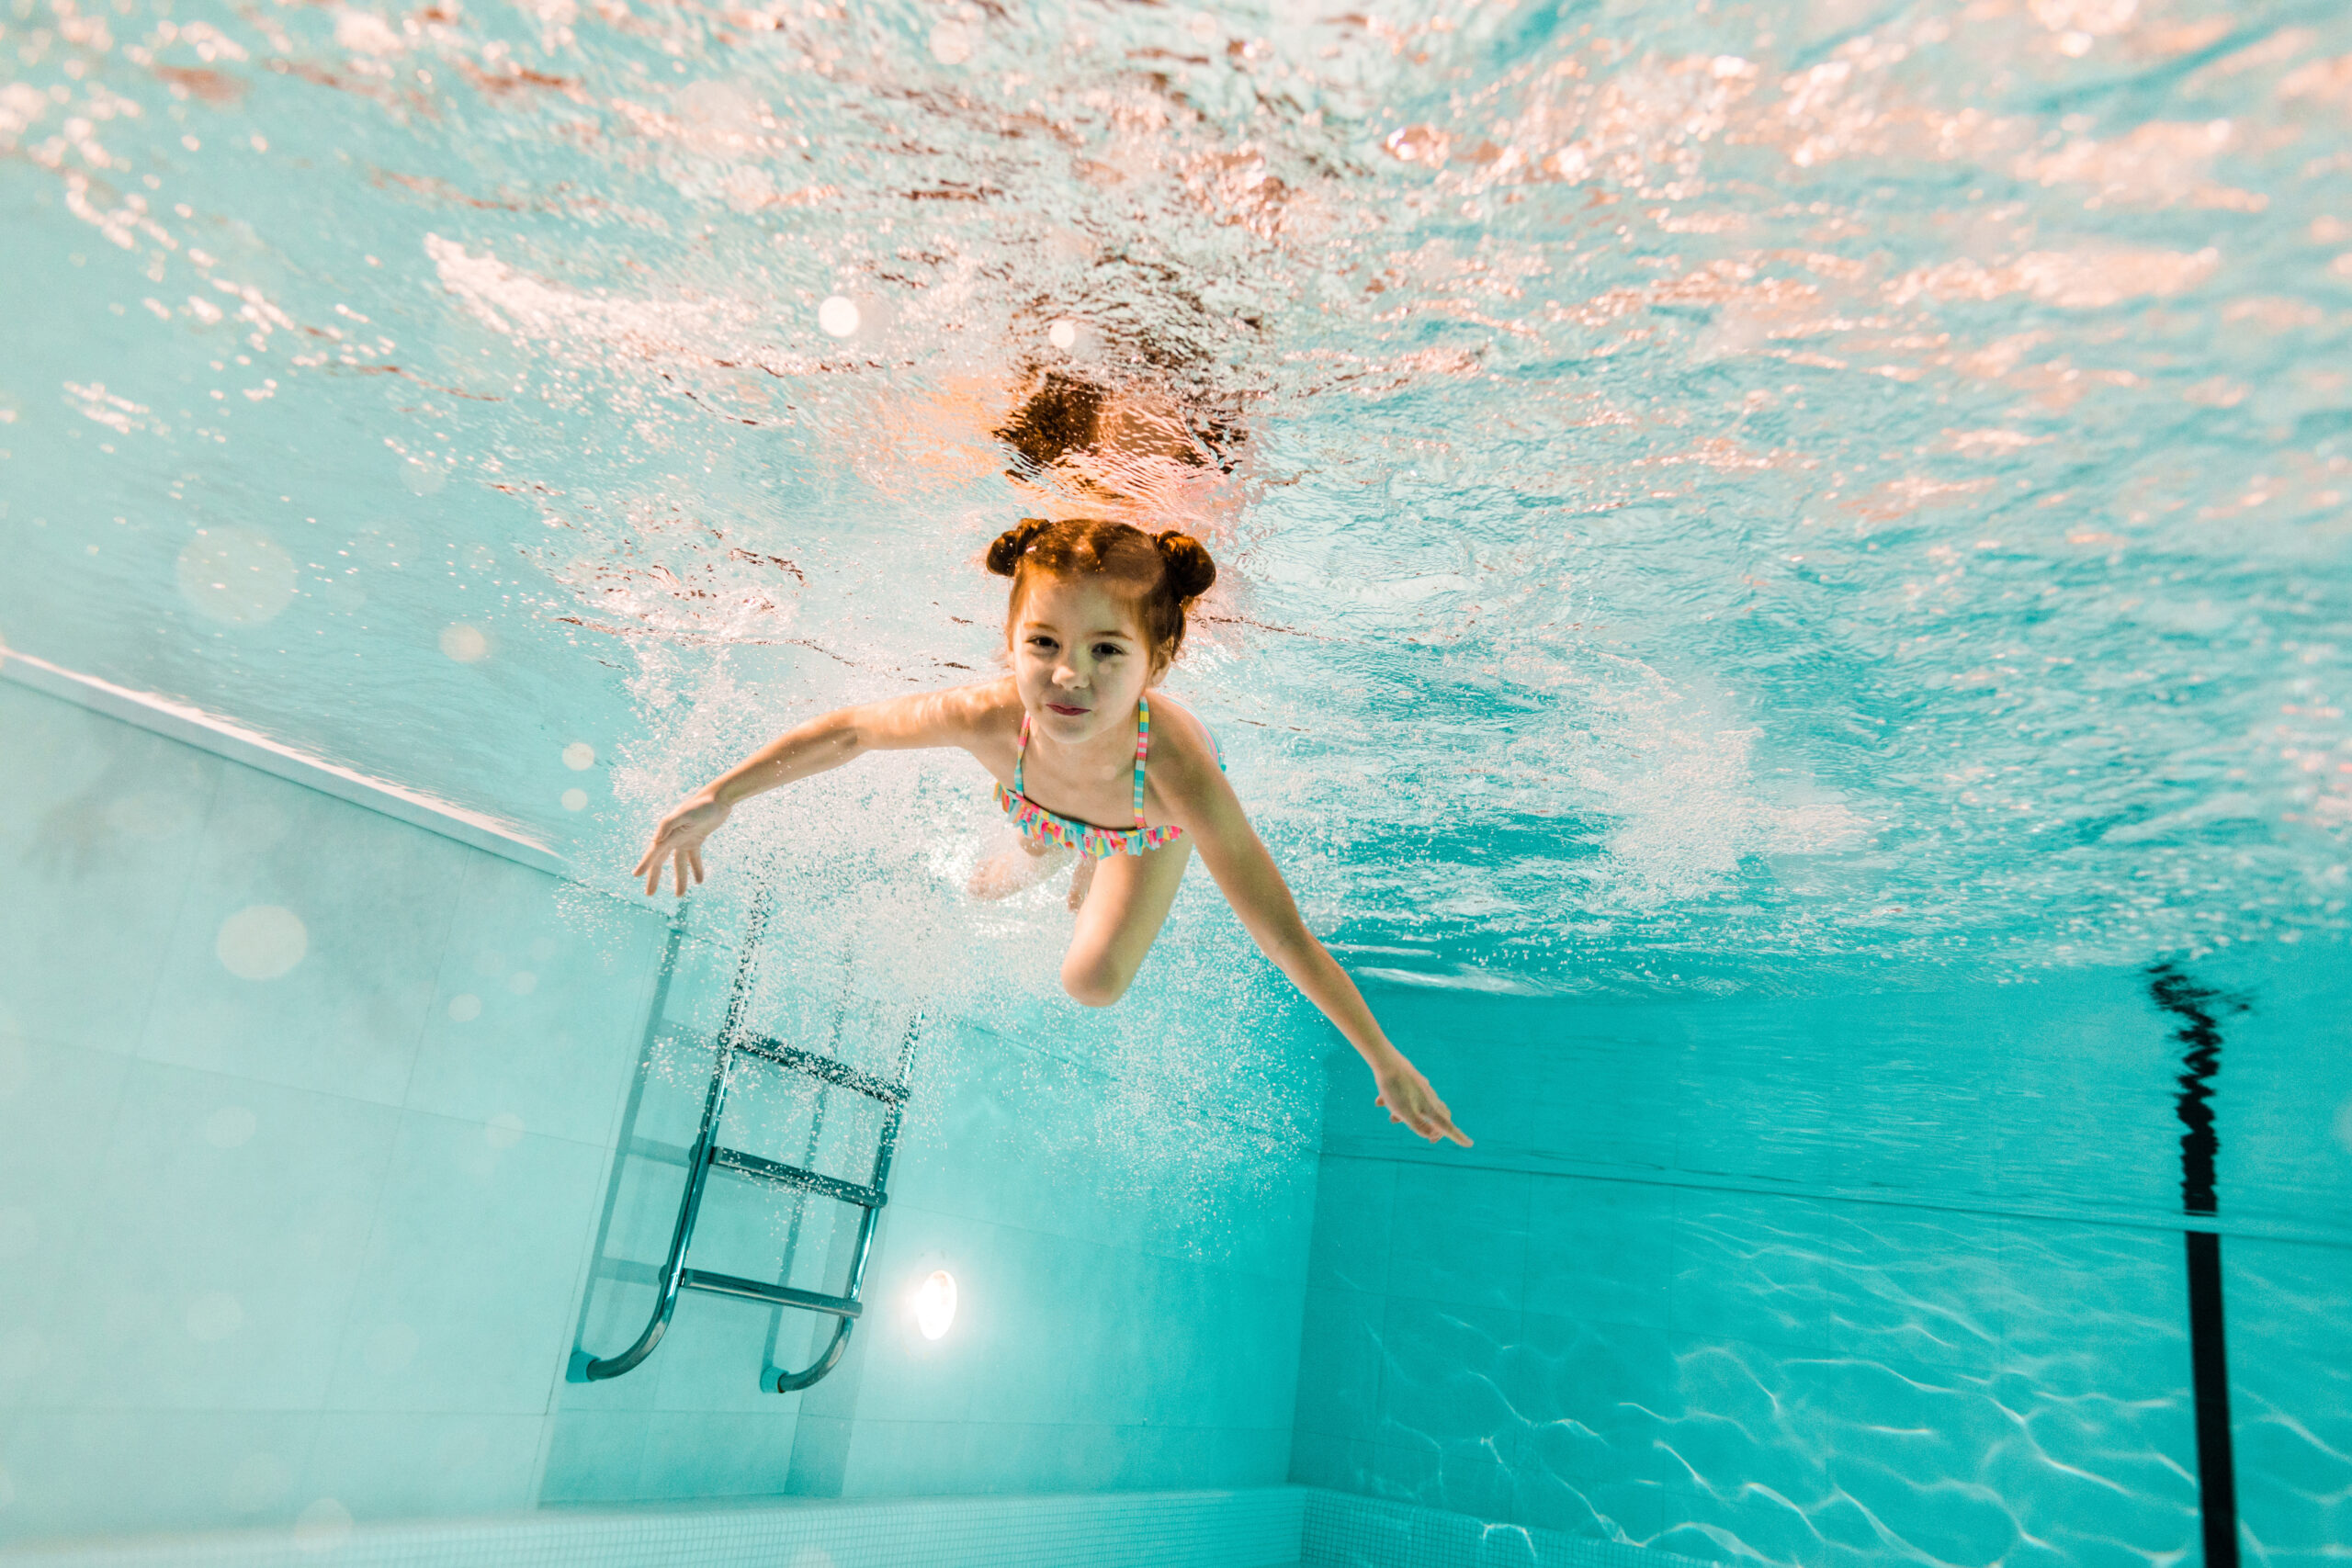 A child diving into the water, demonstrating a joyful and playful leap into the pool.